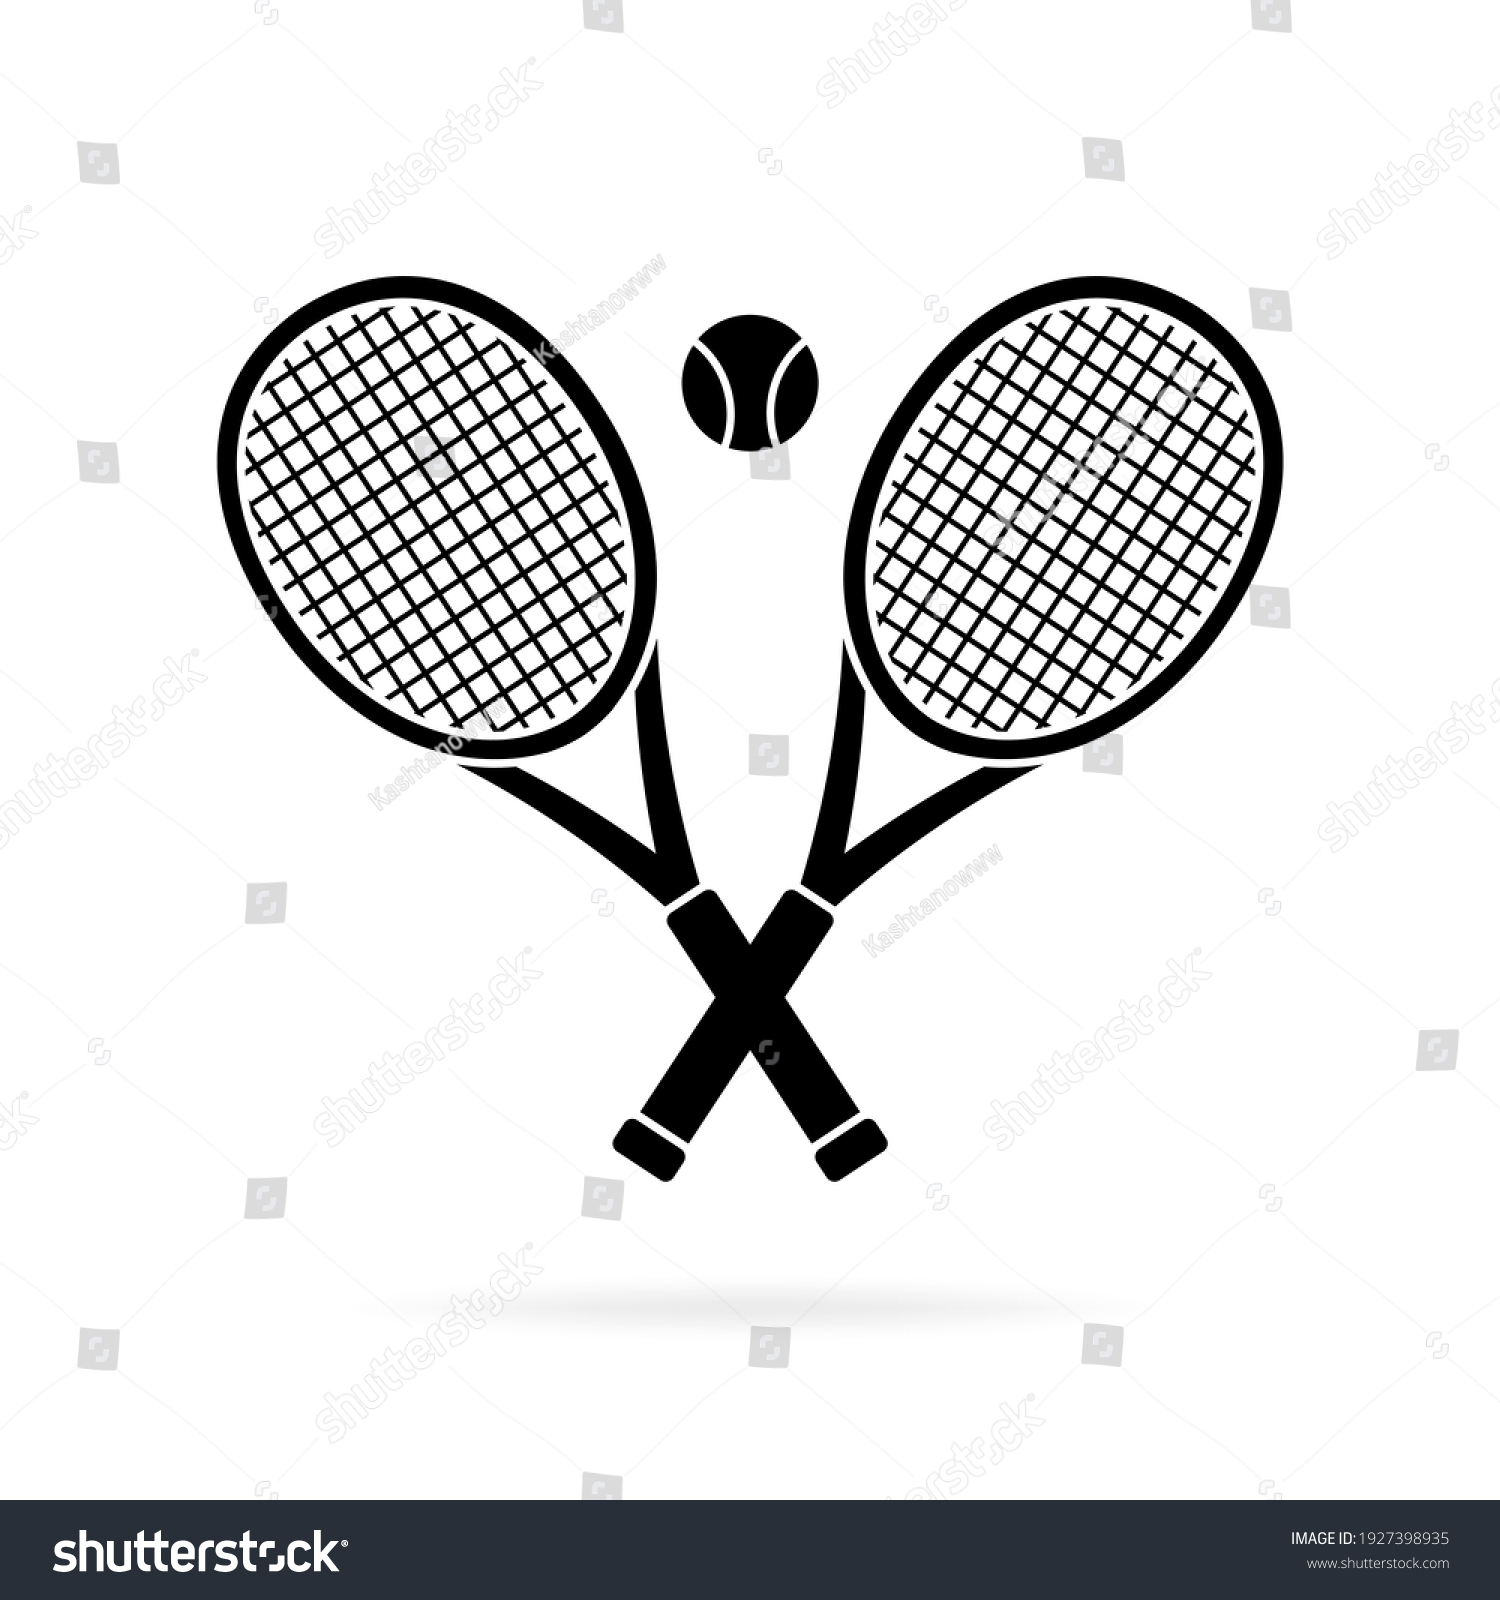 Tennis rackets crossed and ball silhouette, icon isolated on white background. Simple flat design. Vector illustration. #1927398935